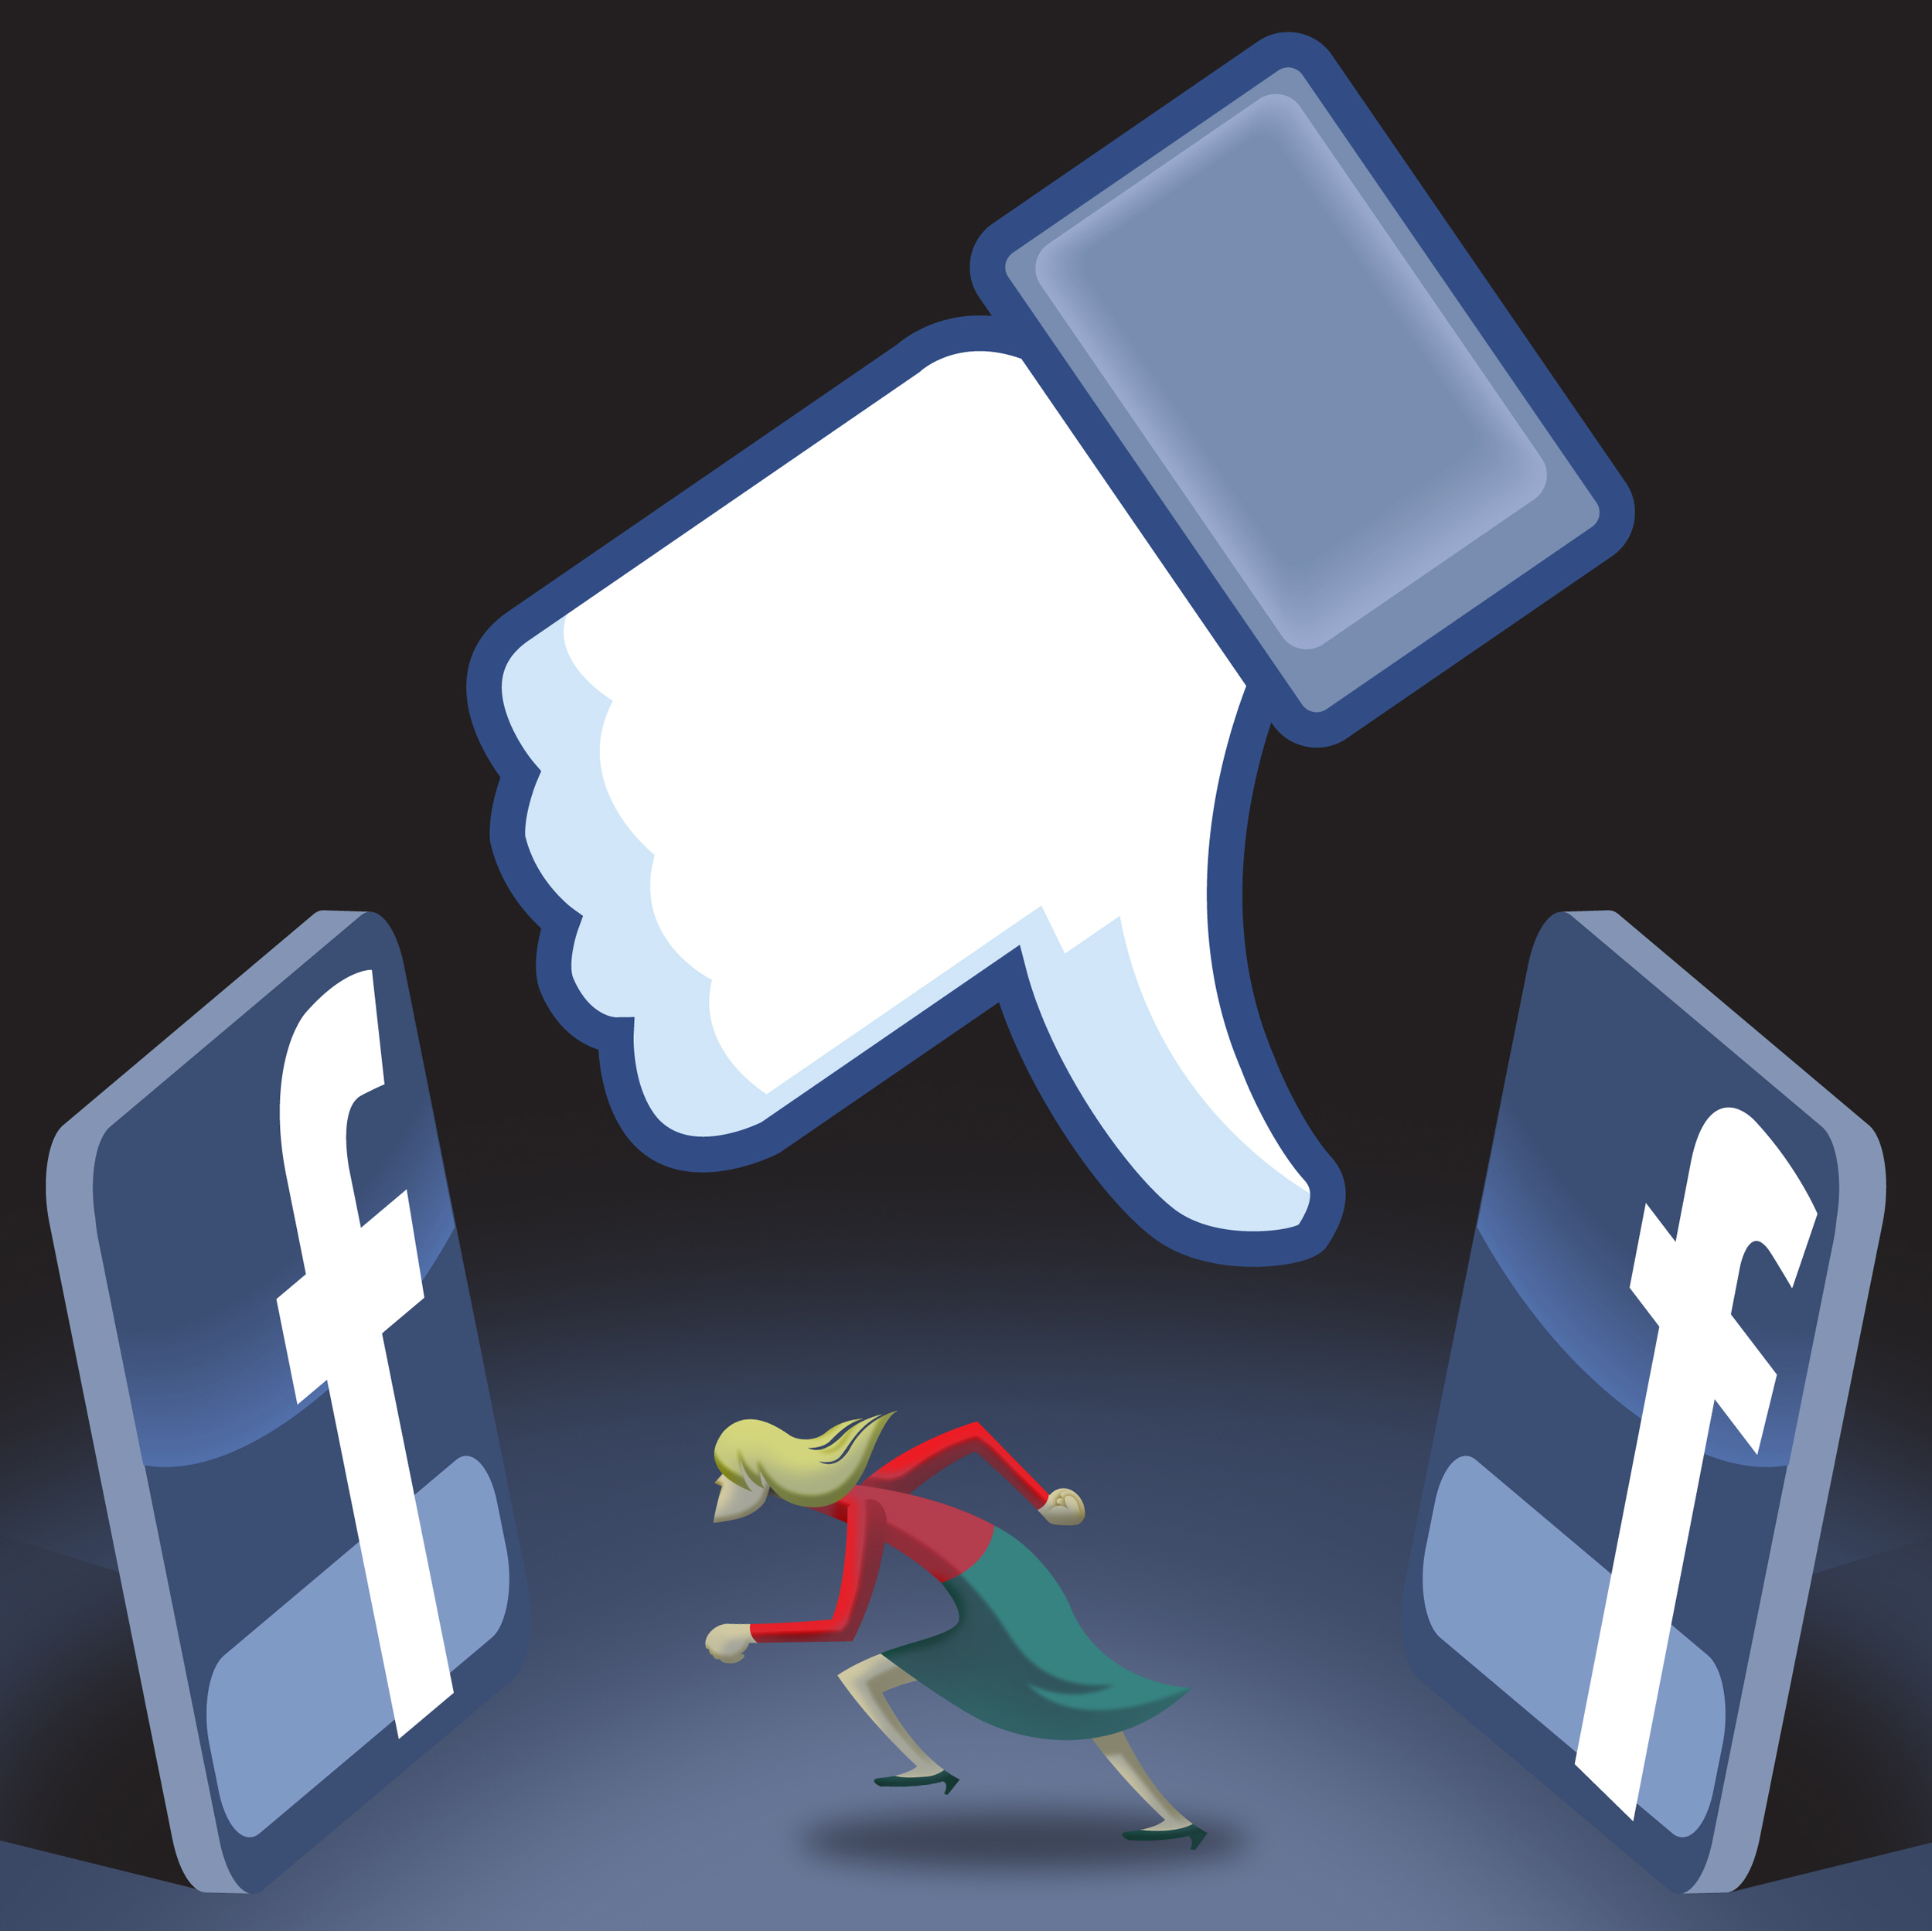 Tim Lee illustration of a woman caught between two large Facebook logos with a Facebook thumps up icon turned down; can be used with stories about "escaping" Facebook. Raleigh News and Observer 2012 (Tim Lee/MCT)